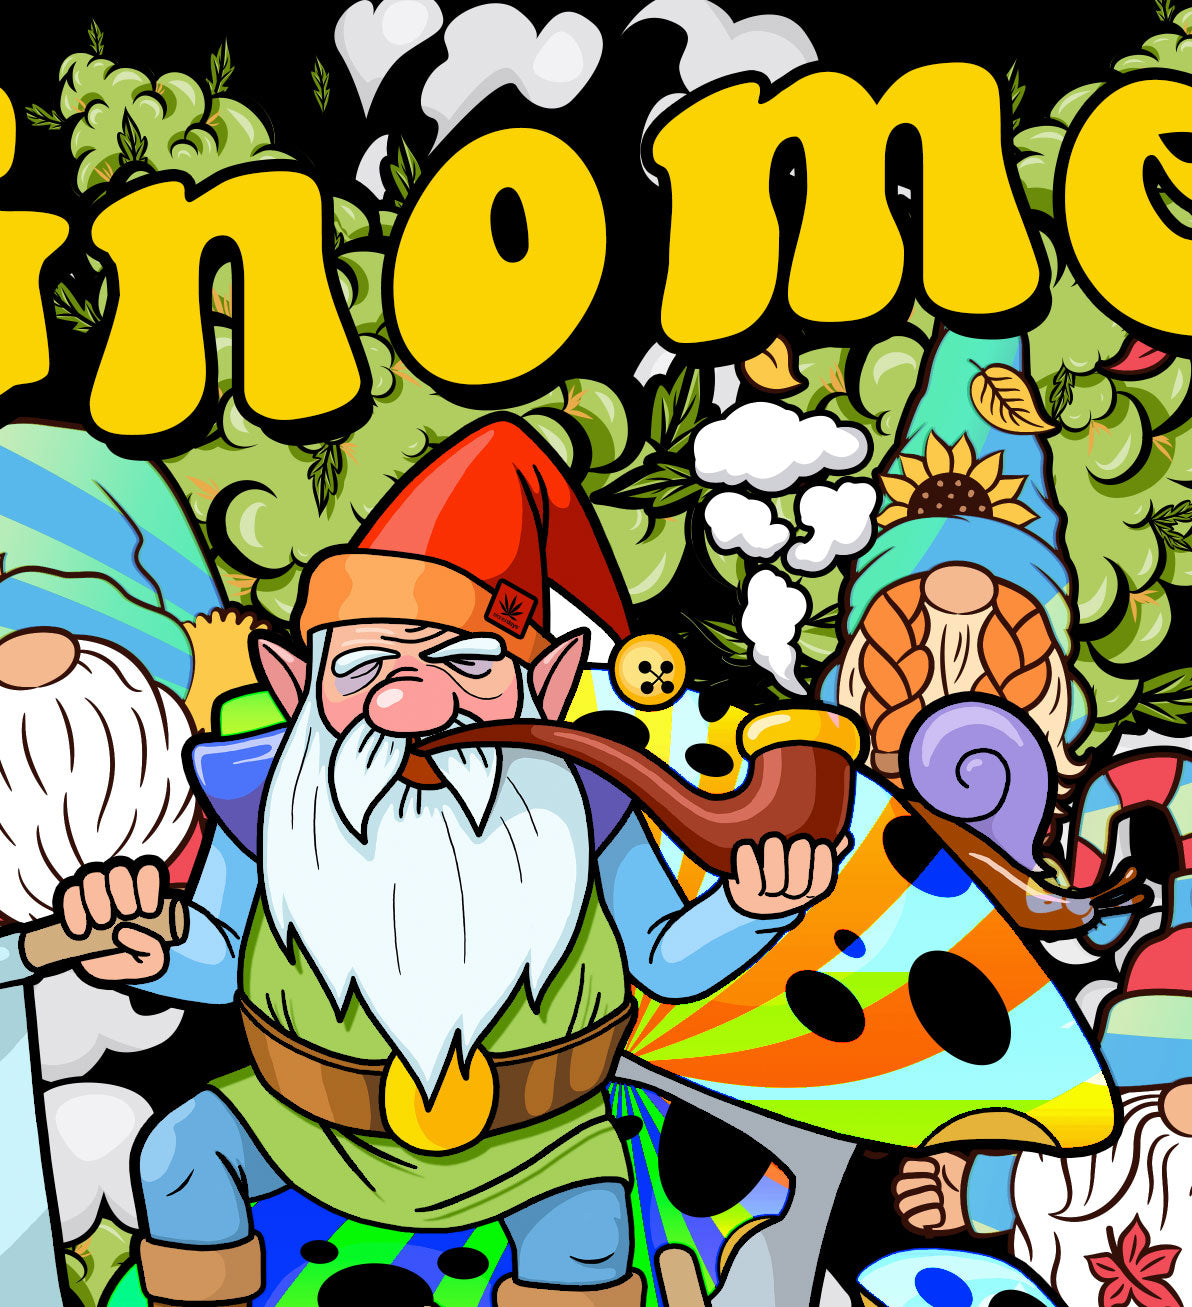 StonerDays Gnome Grown T-shirt with blue tie-dye design and fun gnome graphics, size options available